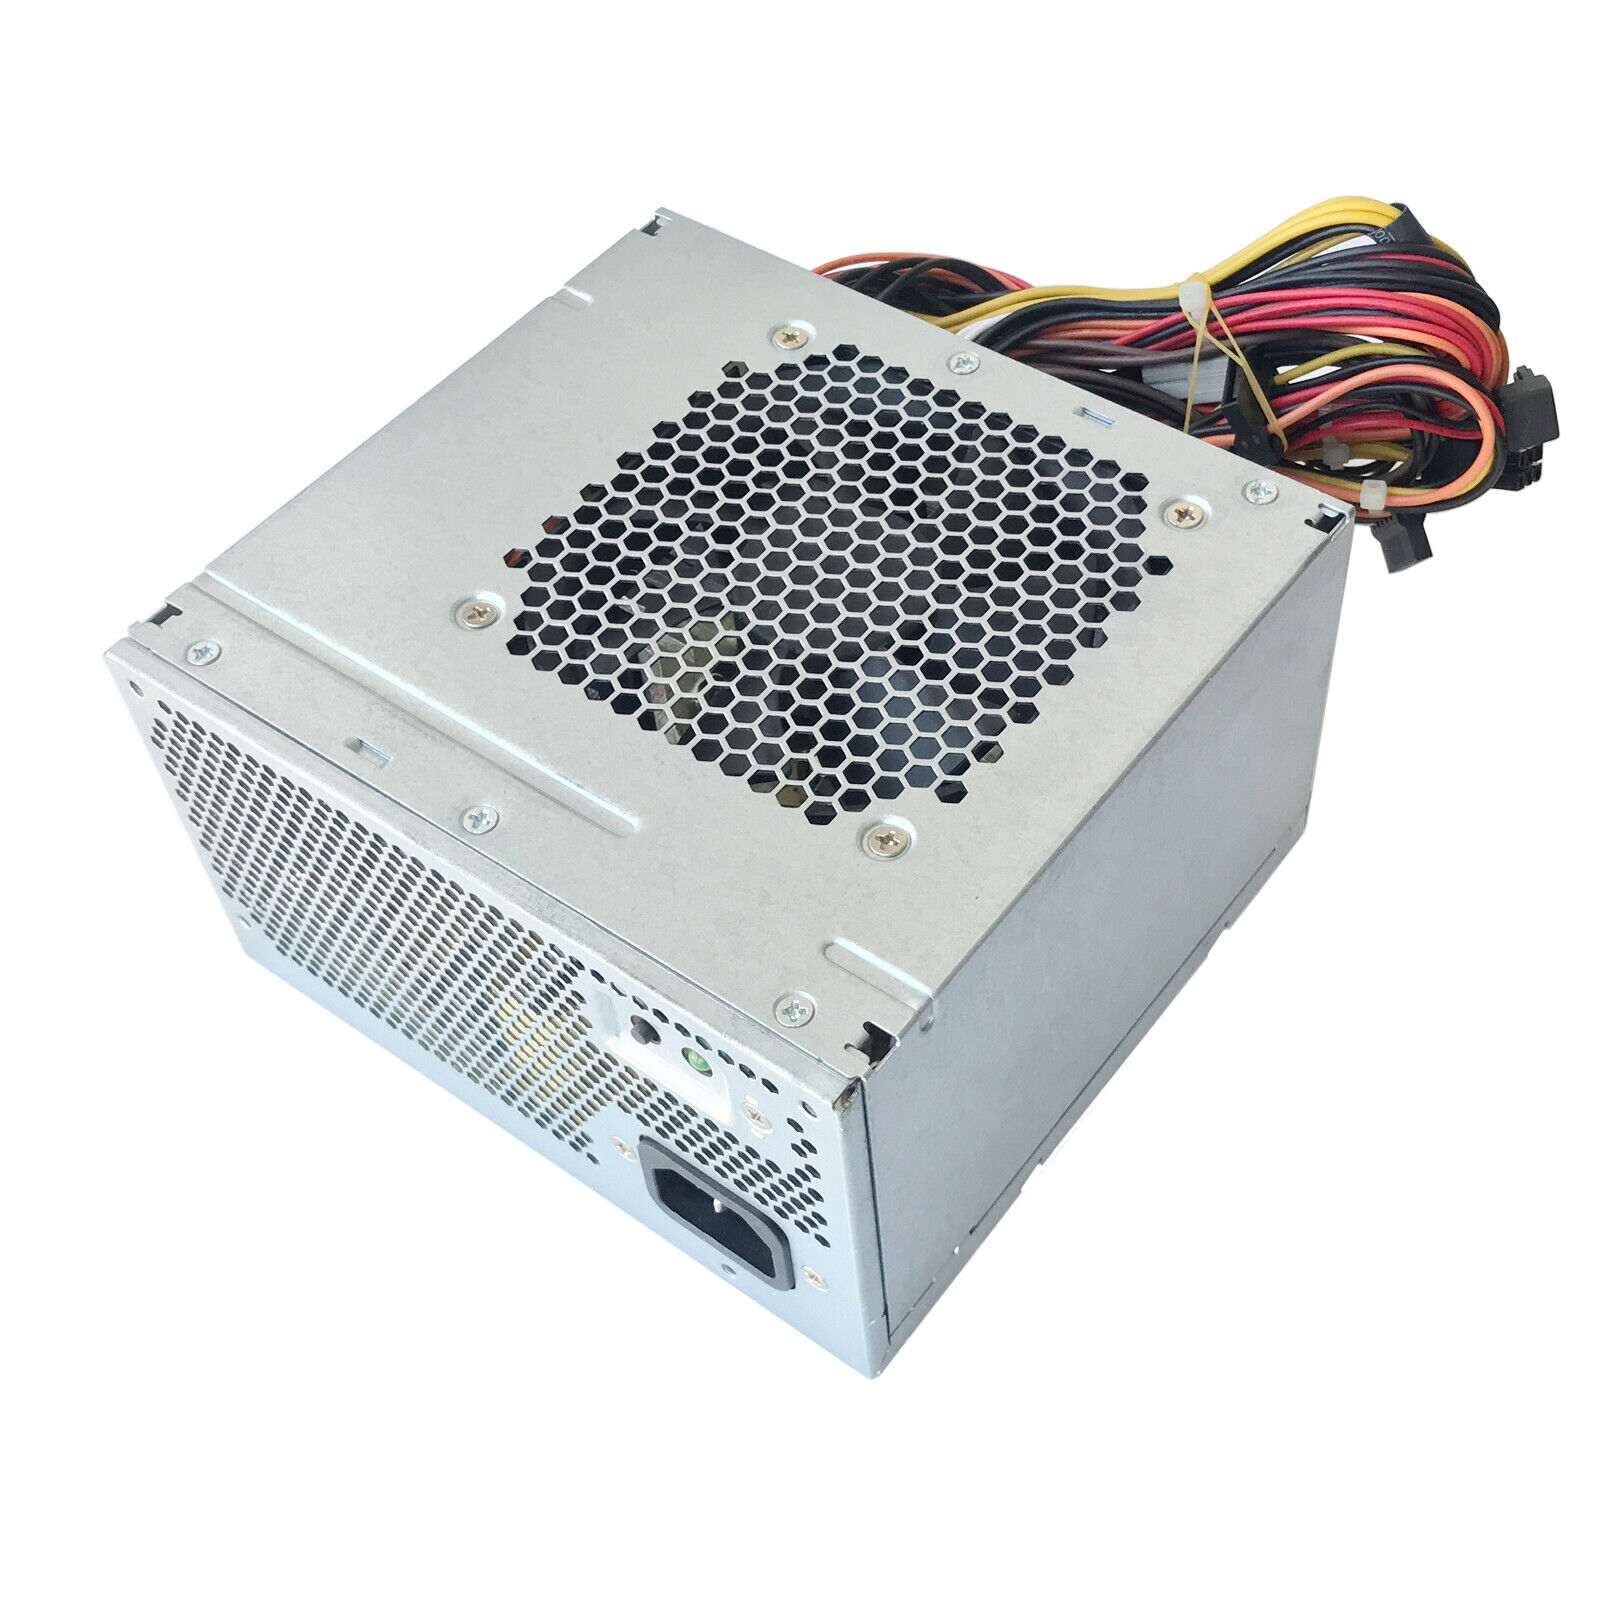 New For DELL XPS 8910 8920 8300 8500 8700 8900 R5 AC460AM-03 460W Power Supply